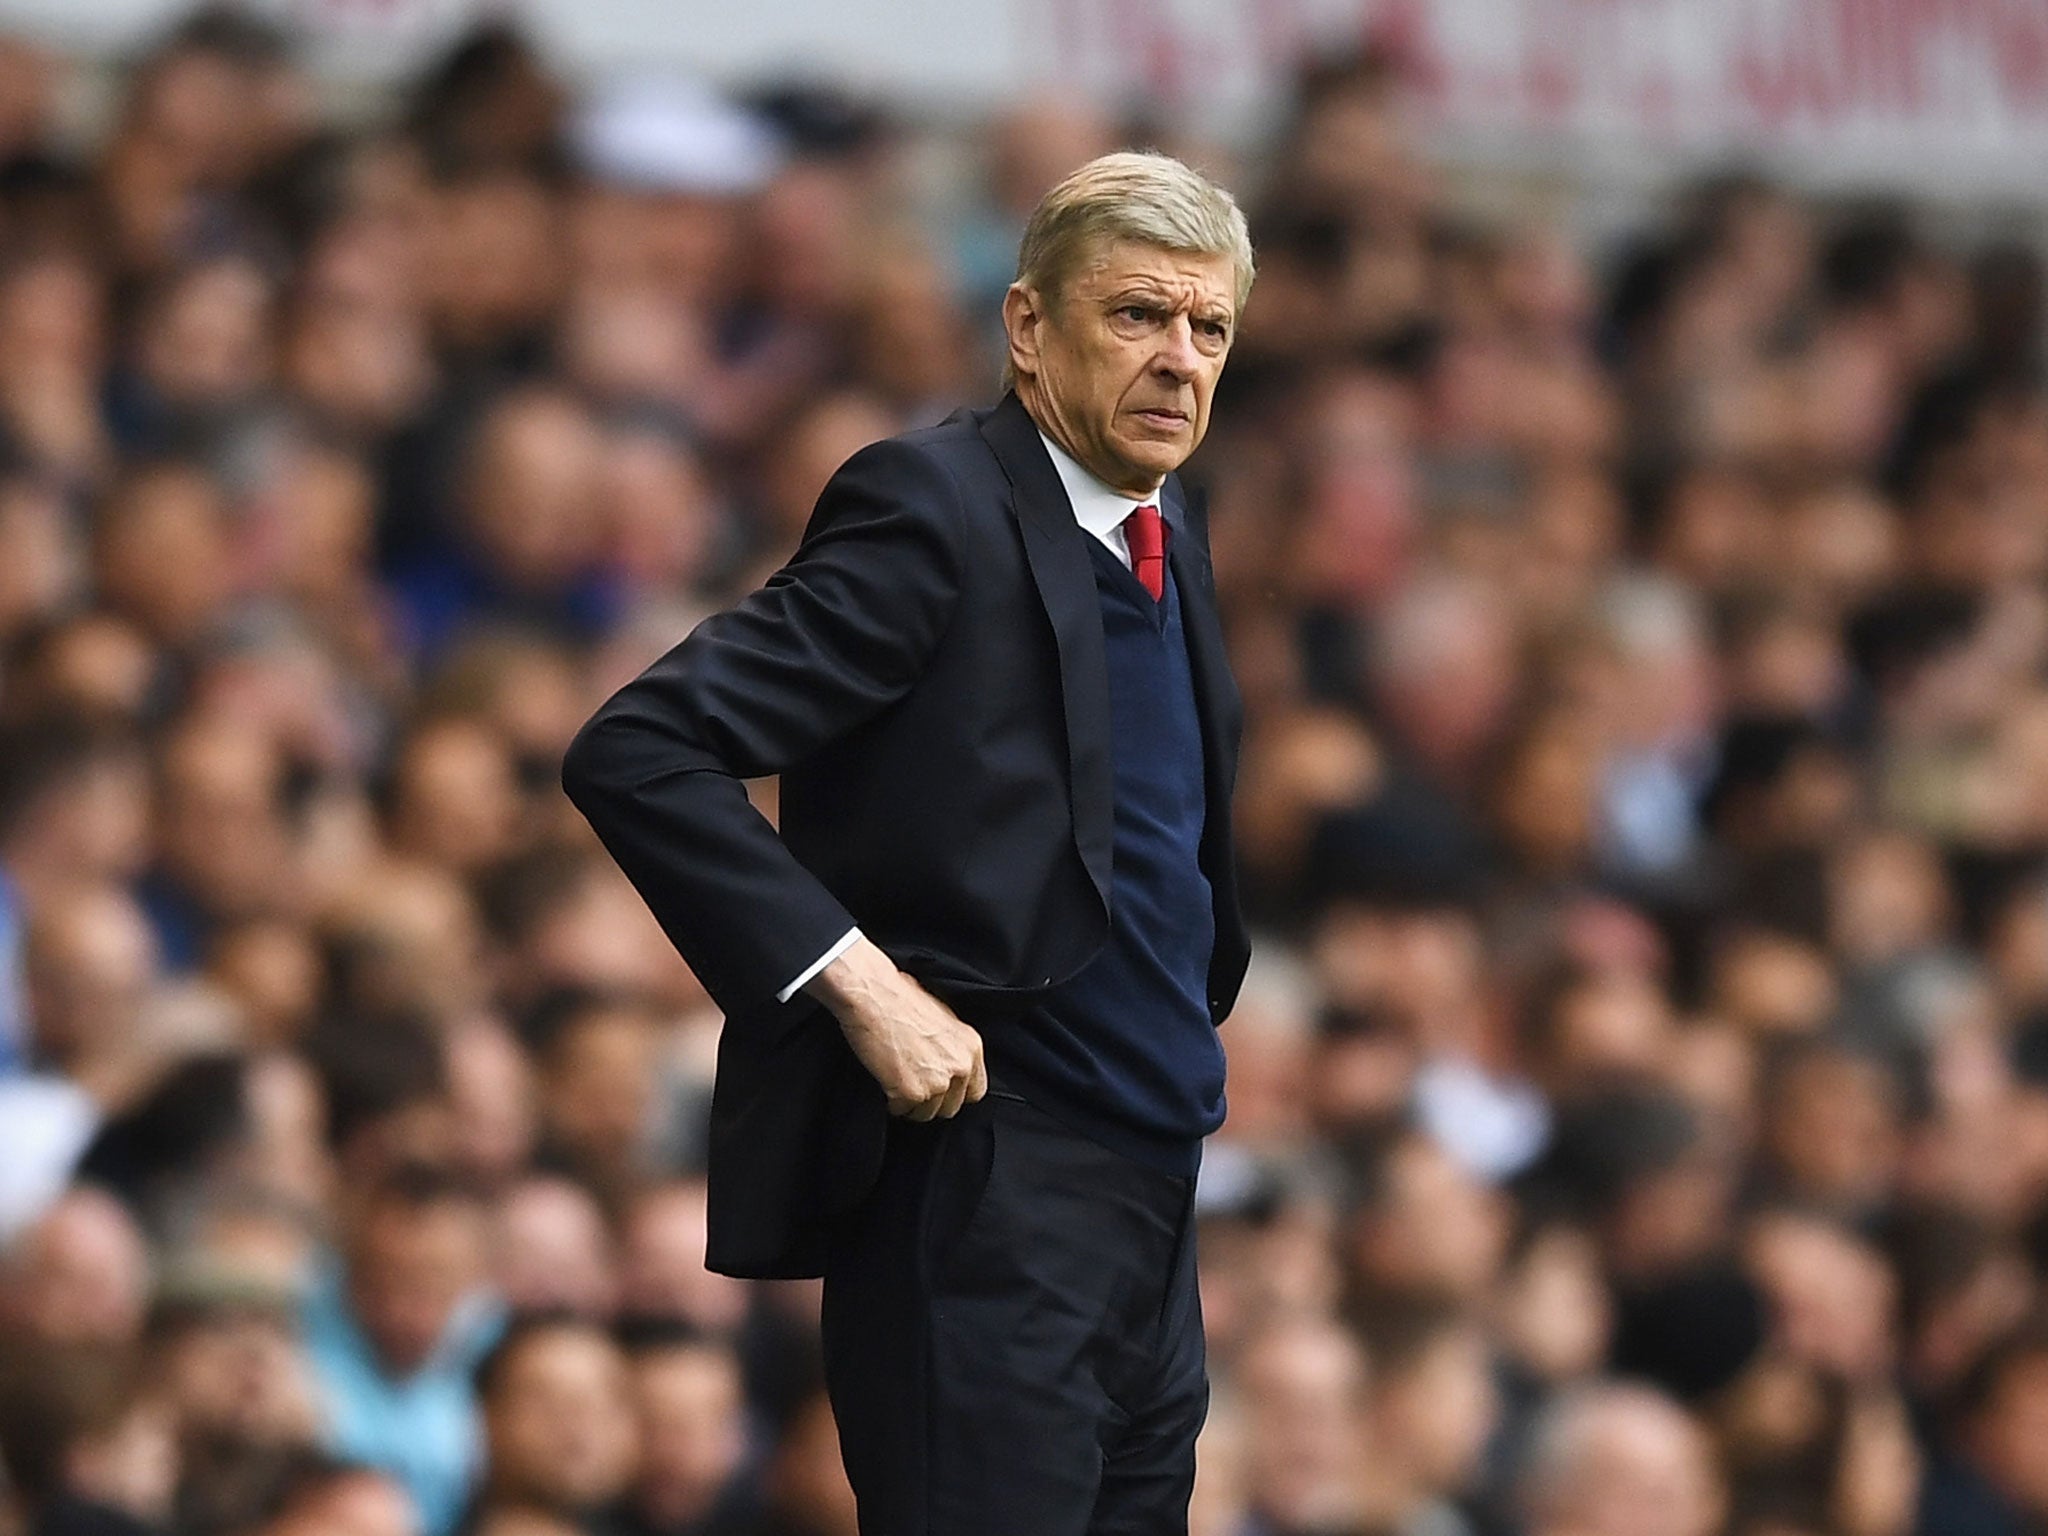 Arsene Wenger can still lead Arsenal to a successful season, says Gary Neville